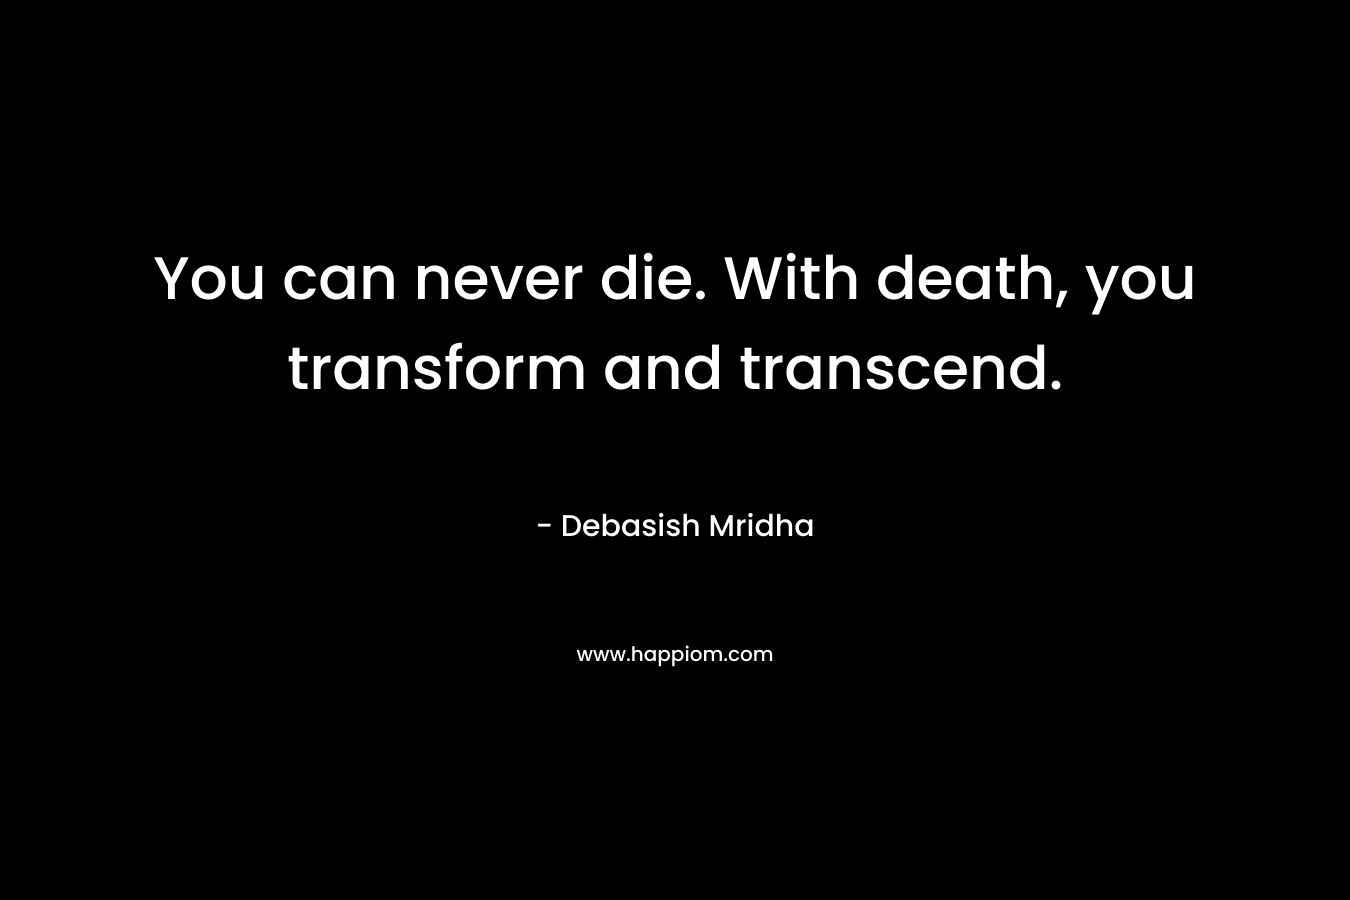 You can never die. With death, you transform and transcend.